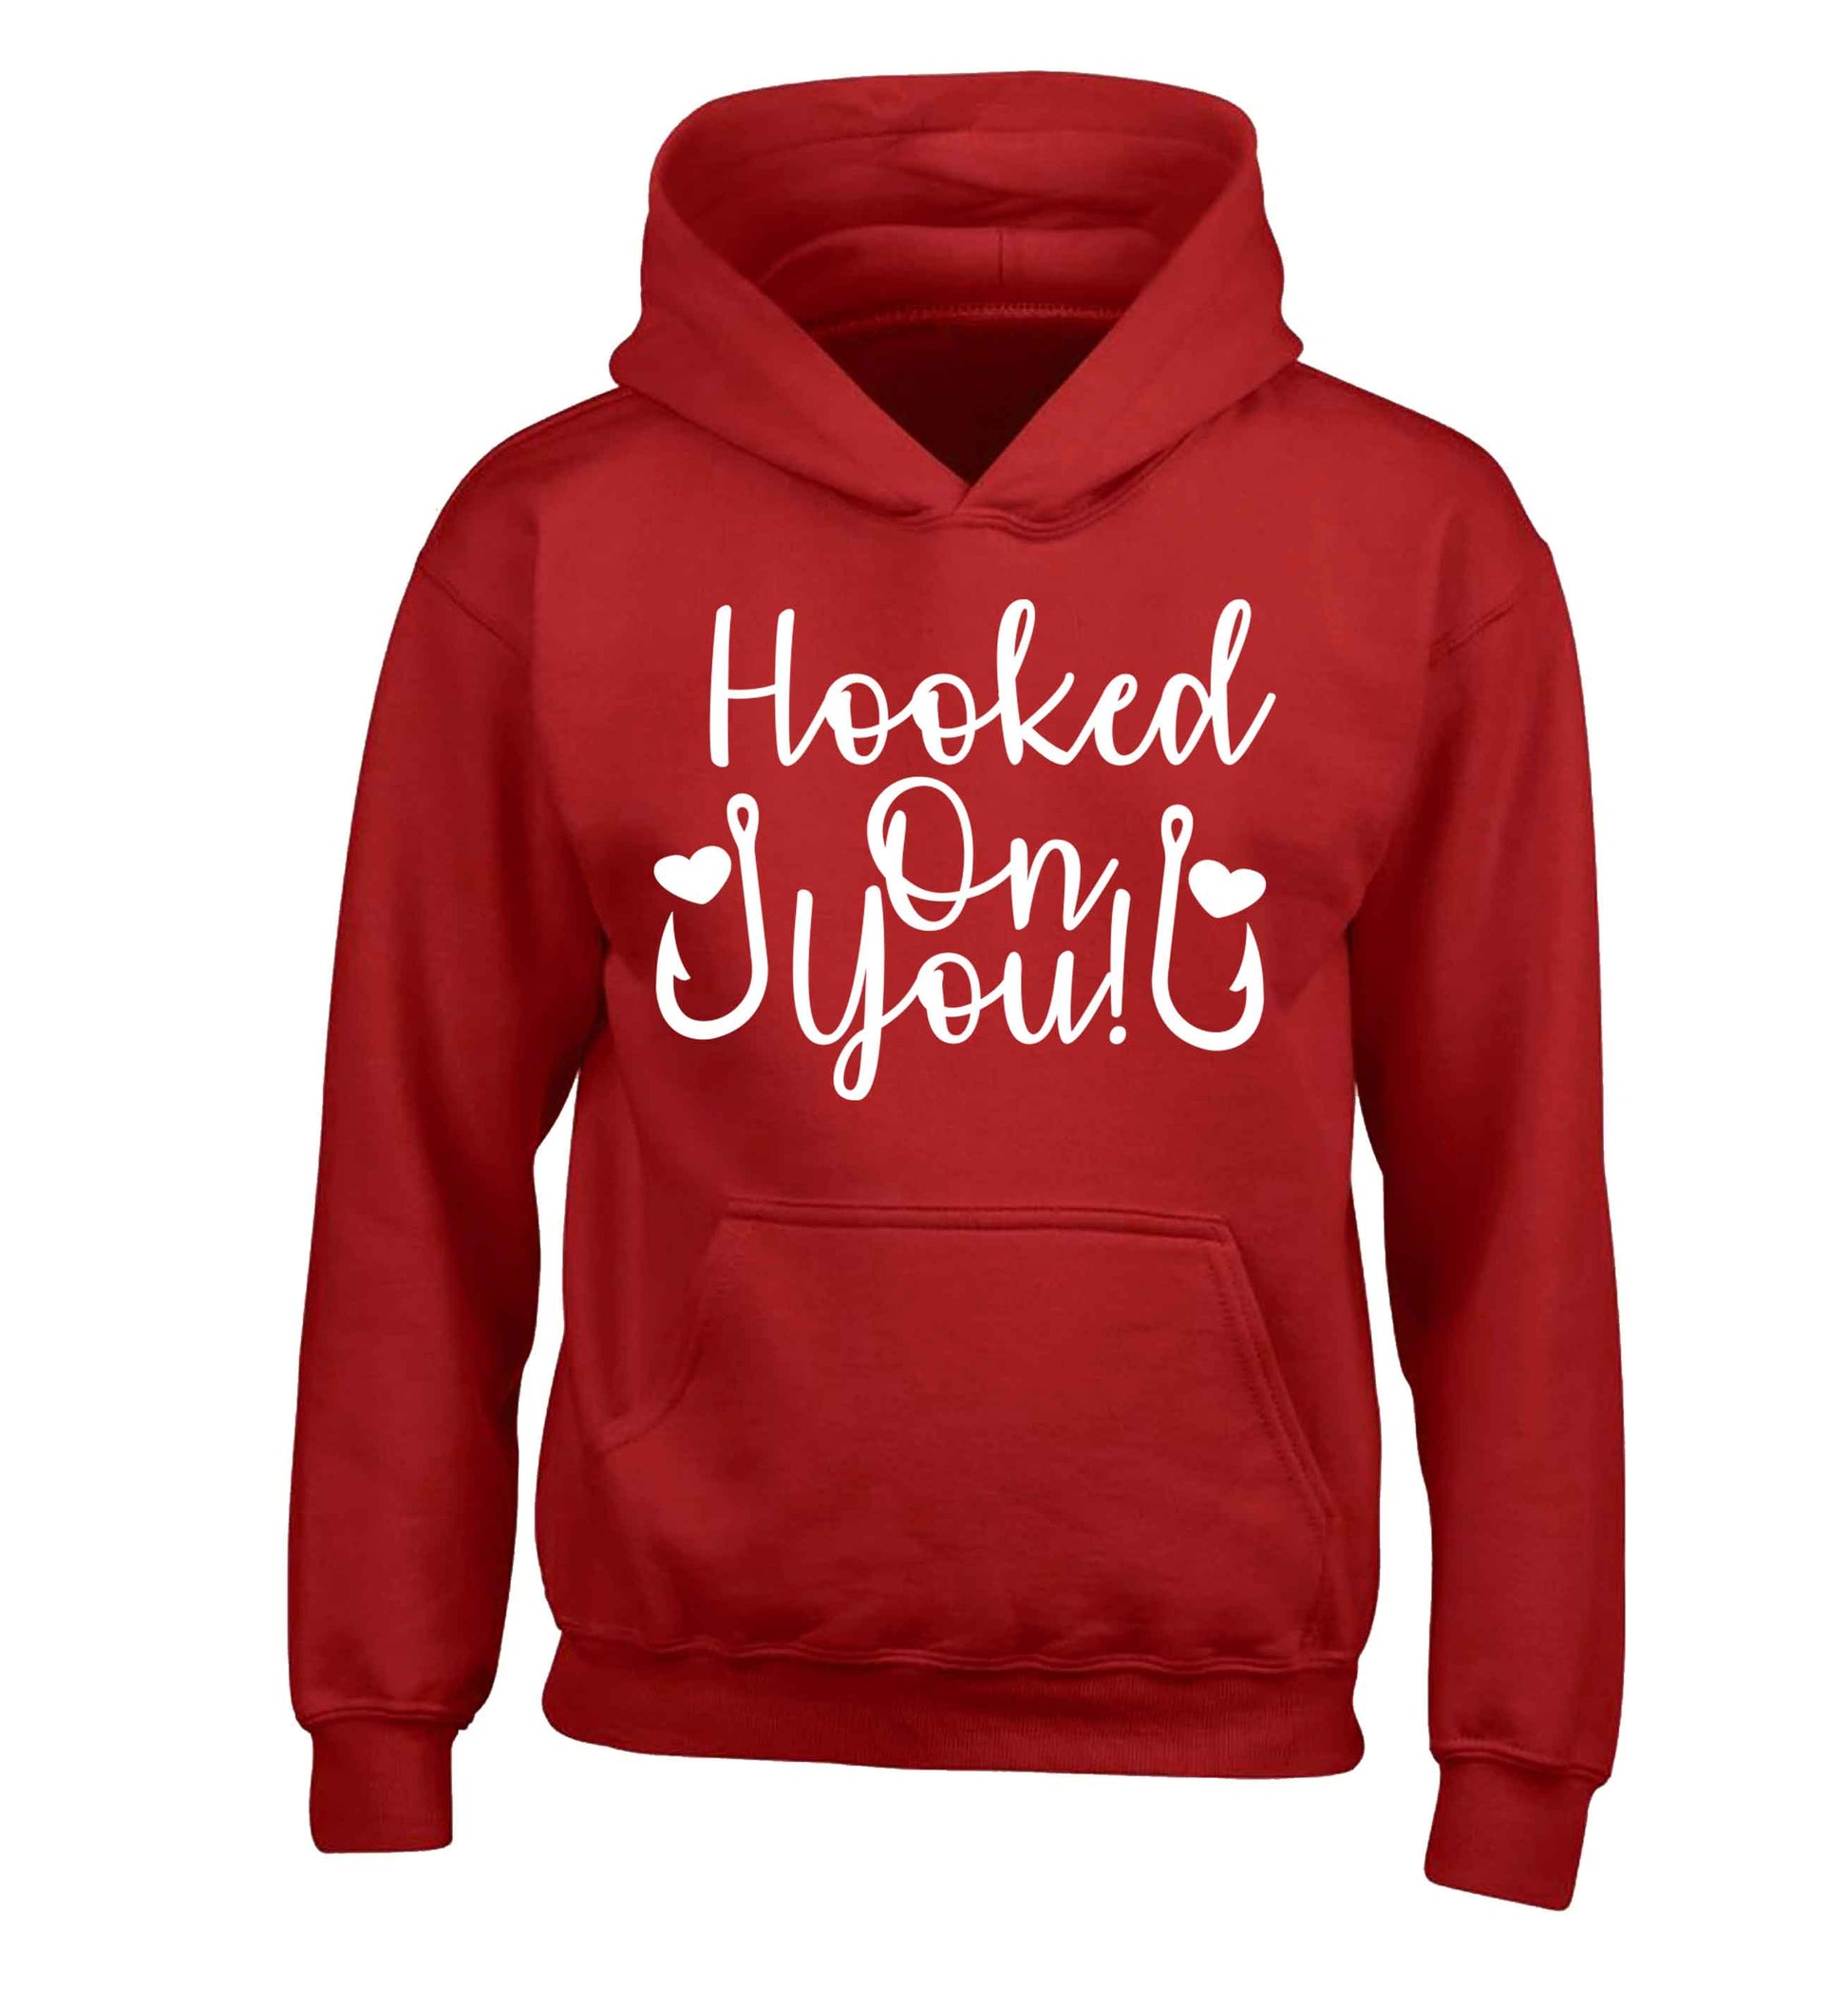 Hooked on you children's red hoodie 12-13 Years